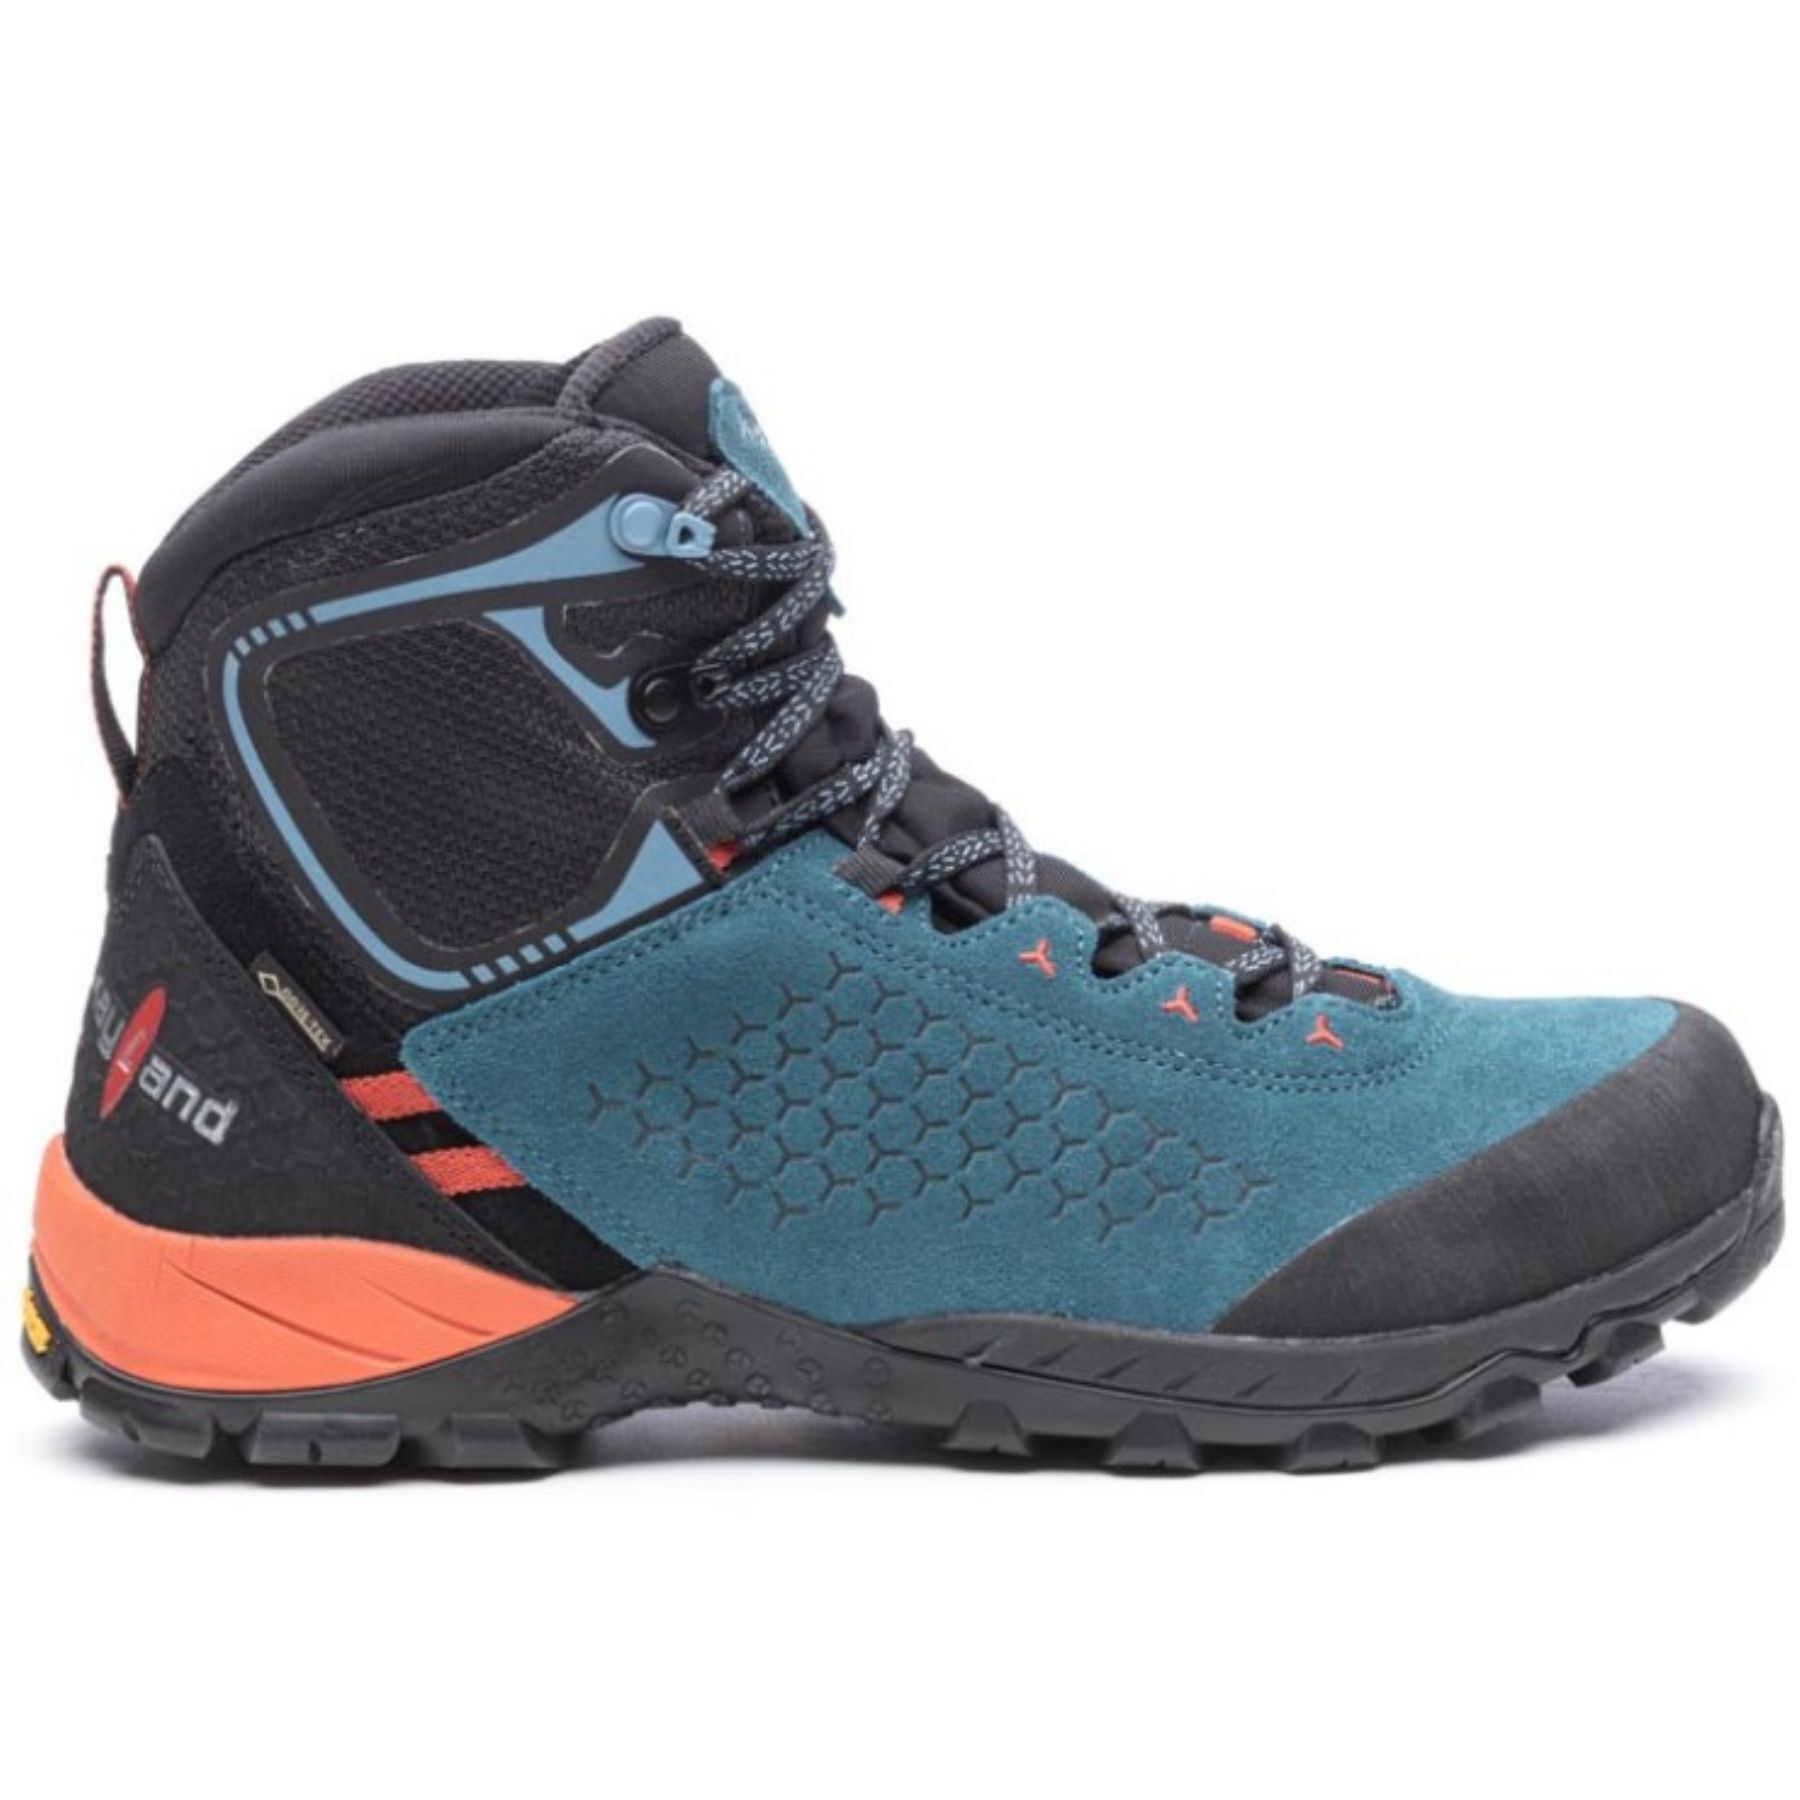 Kayland Inphinity GTX - Hiking boots - Men's